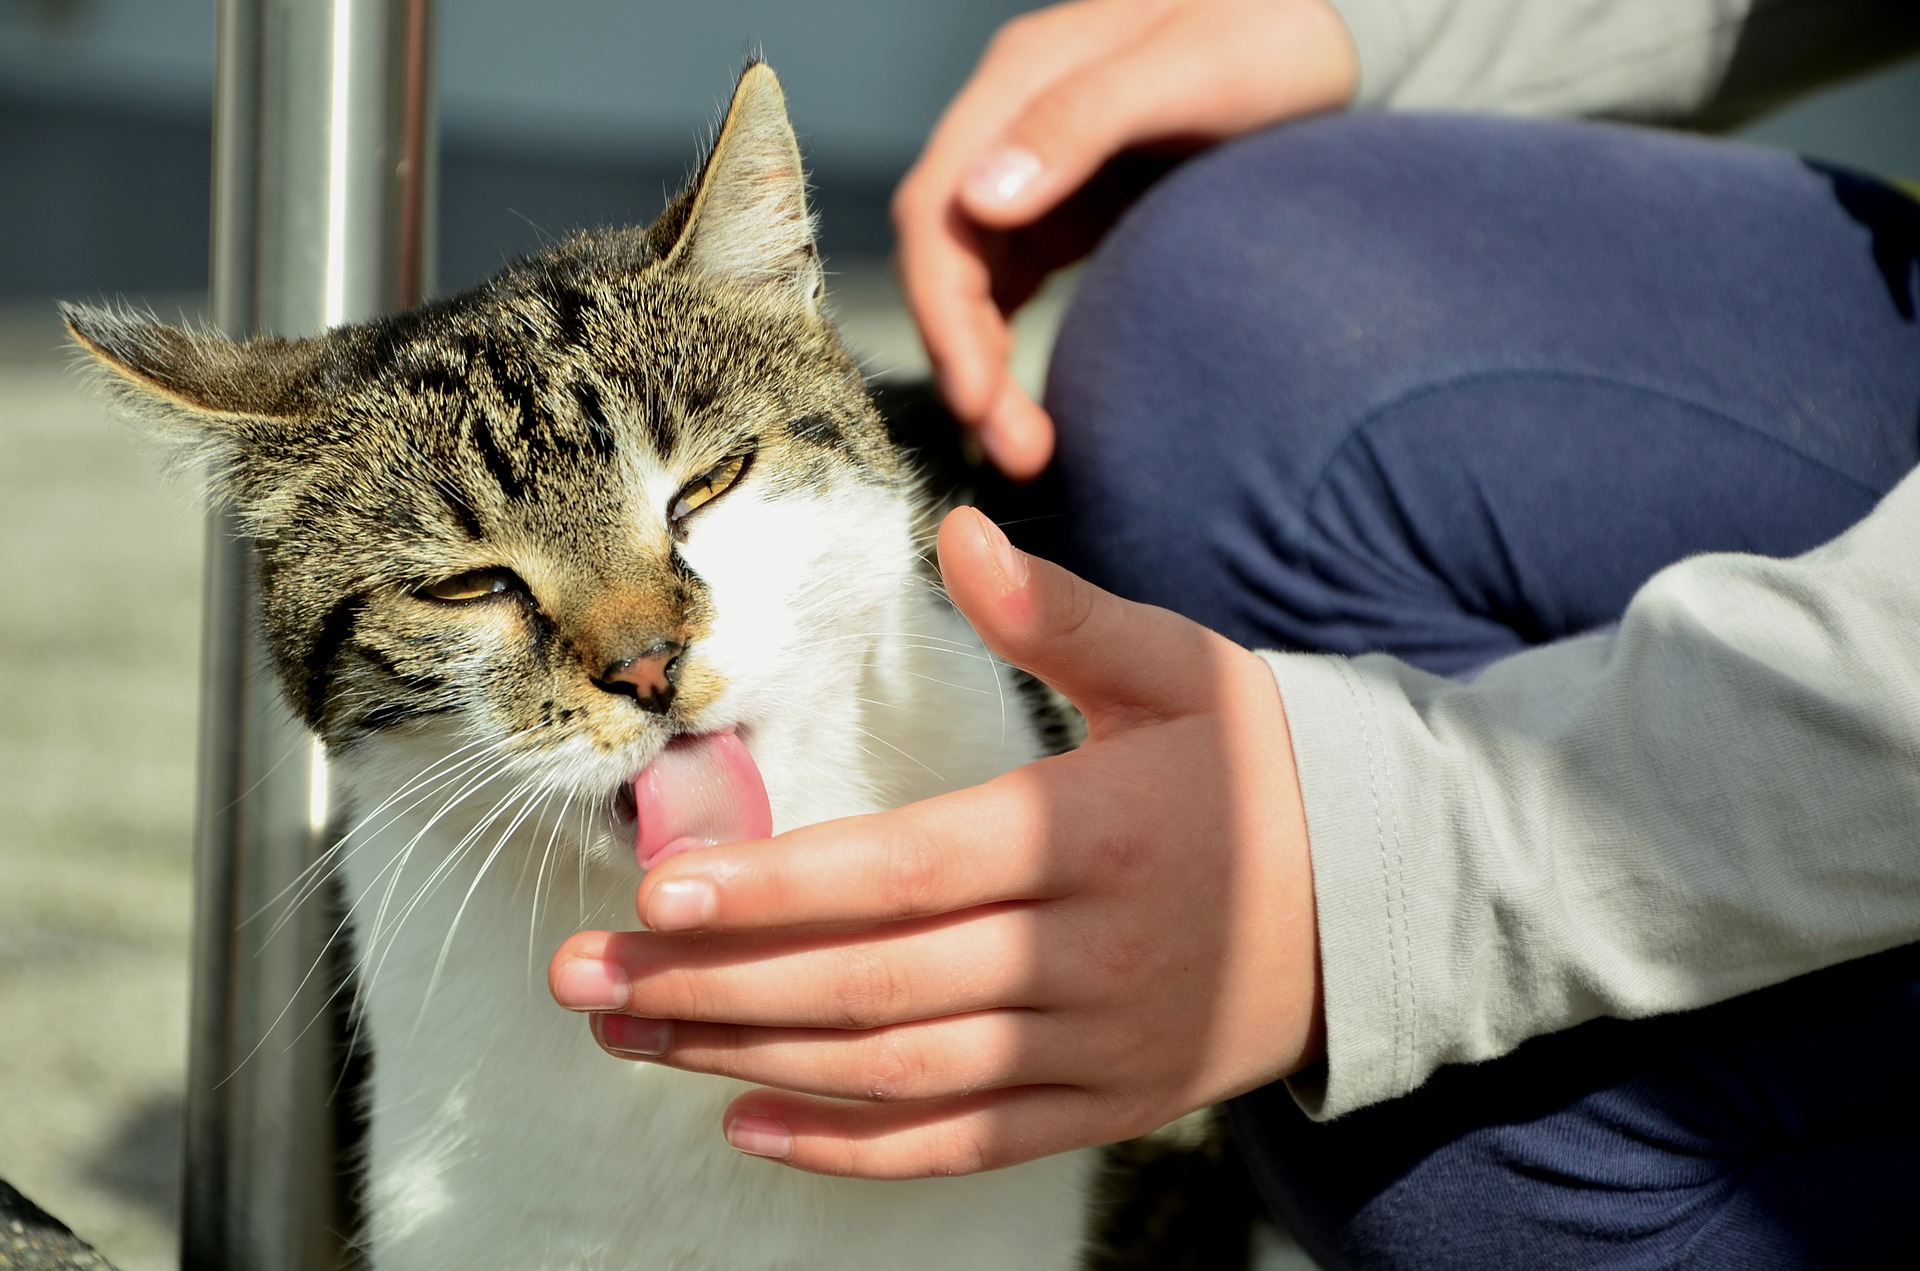 A brown and white cat licking a person's hand